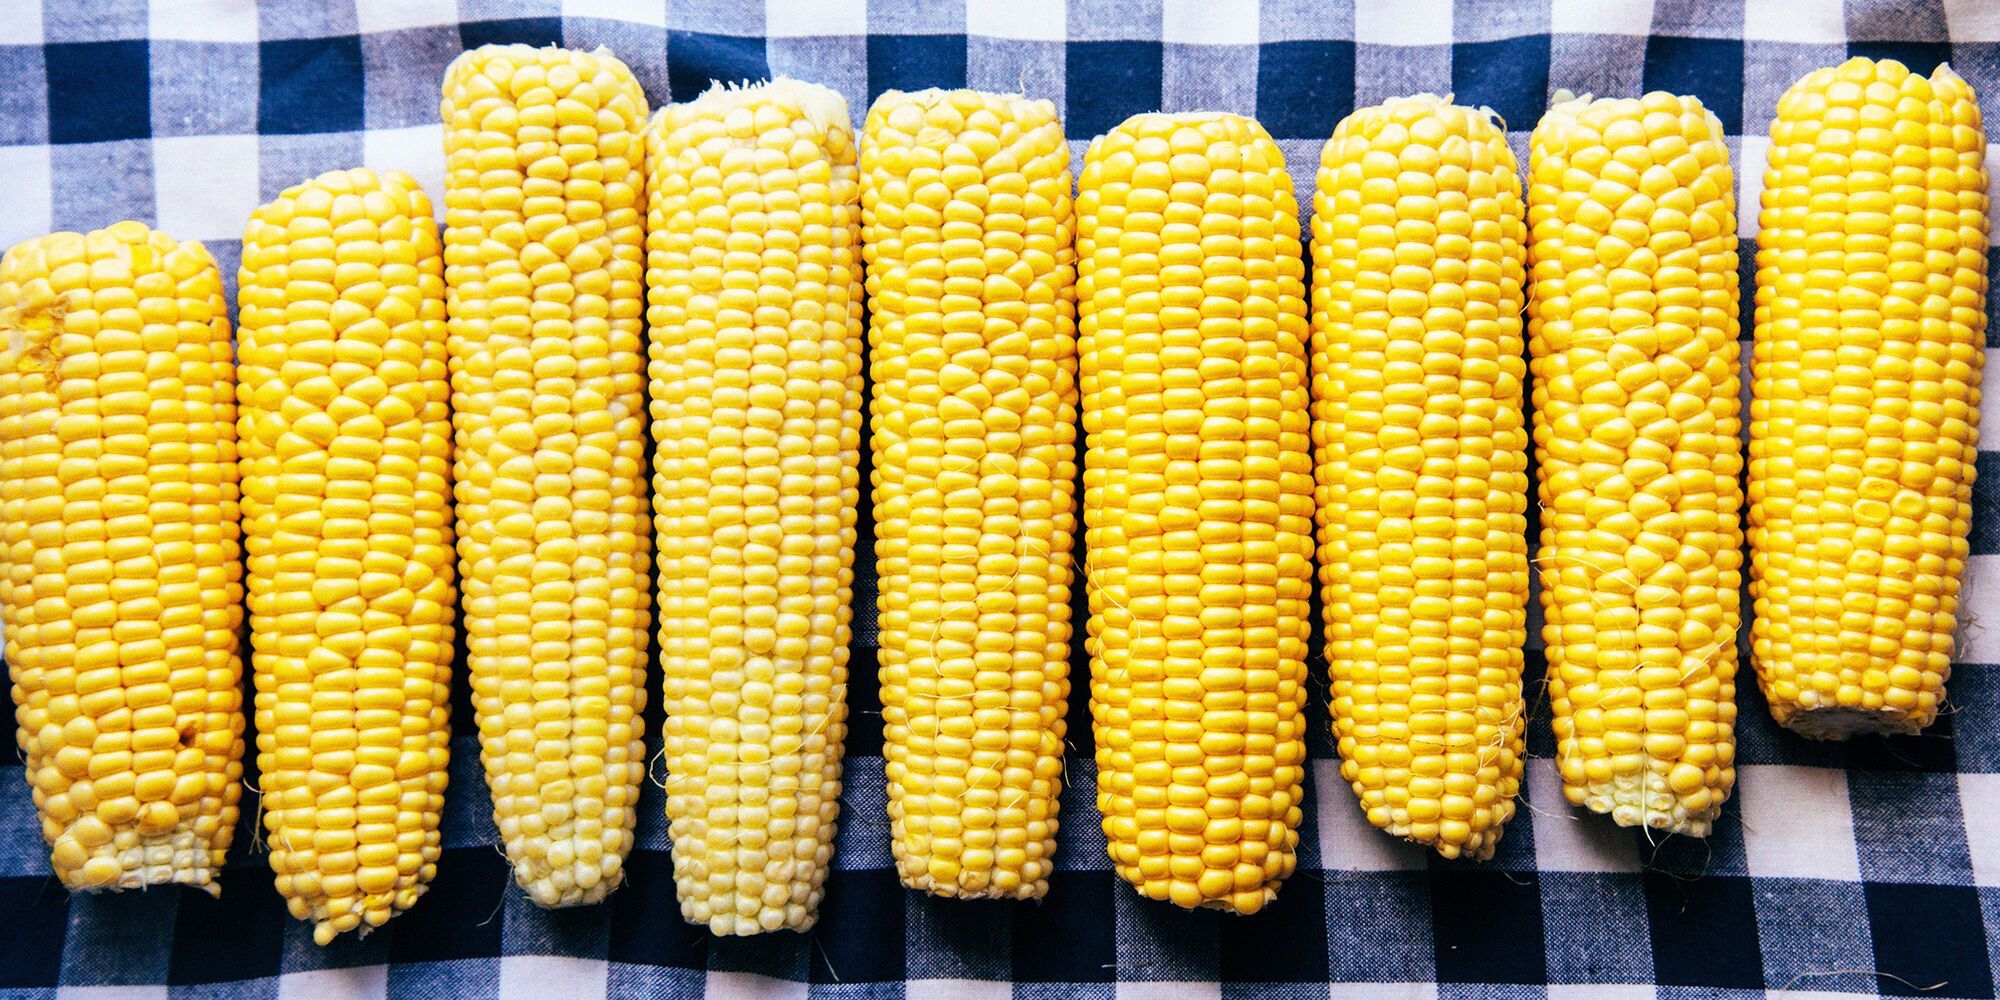 How to choose the right corn